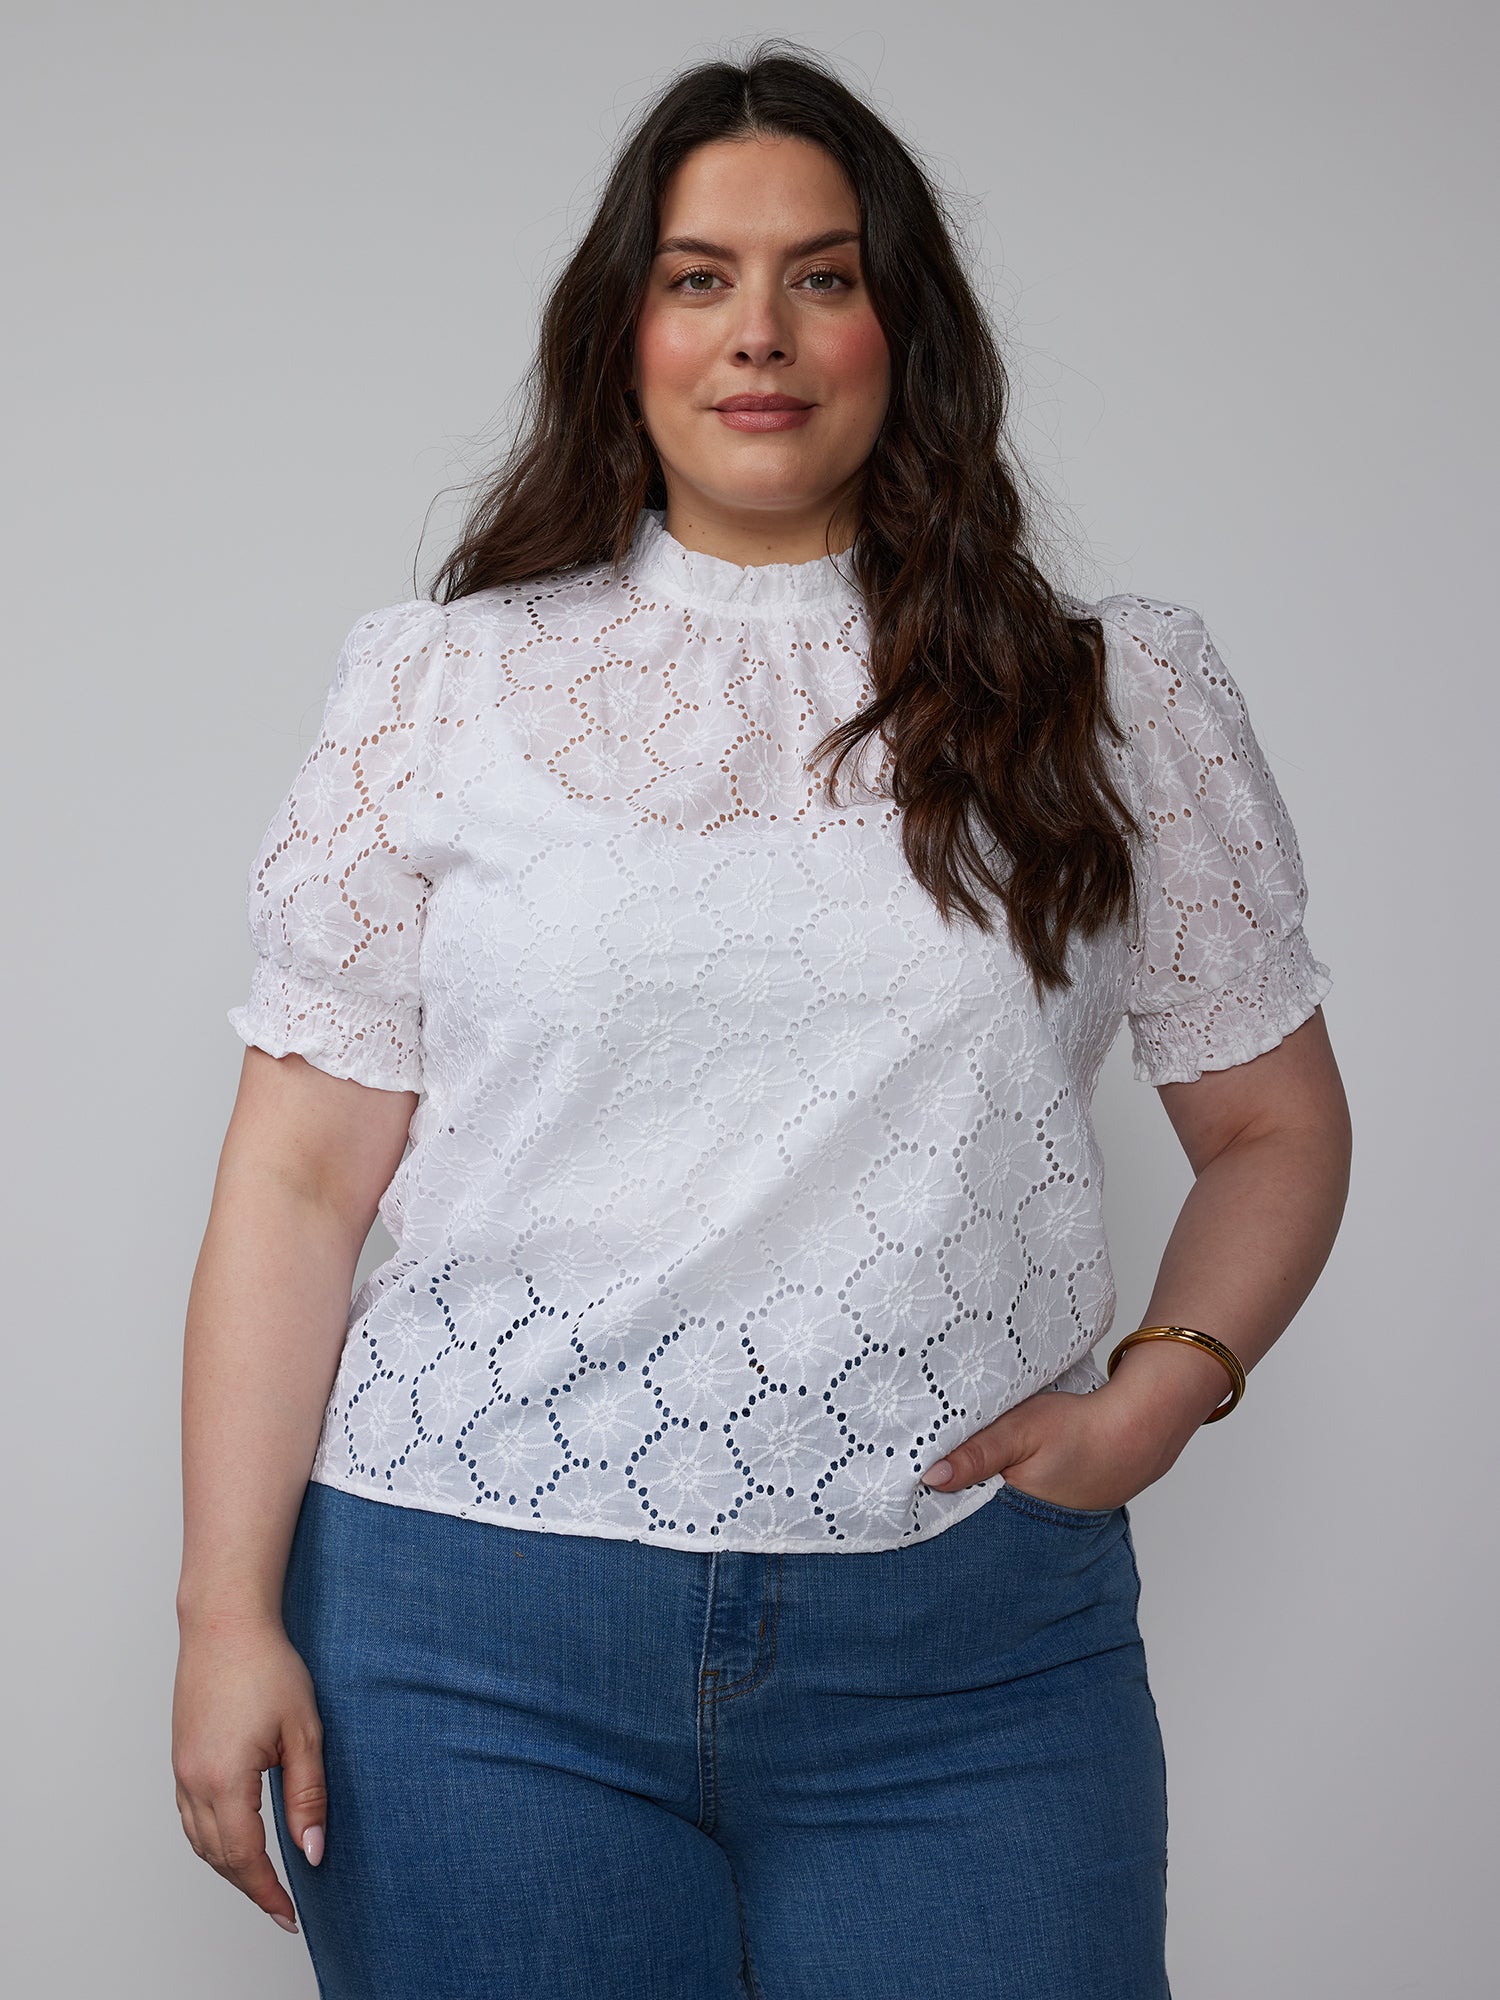 Womens, Plus Size Tops